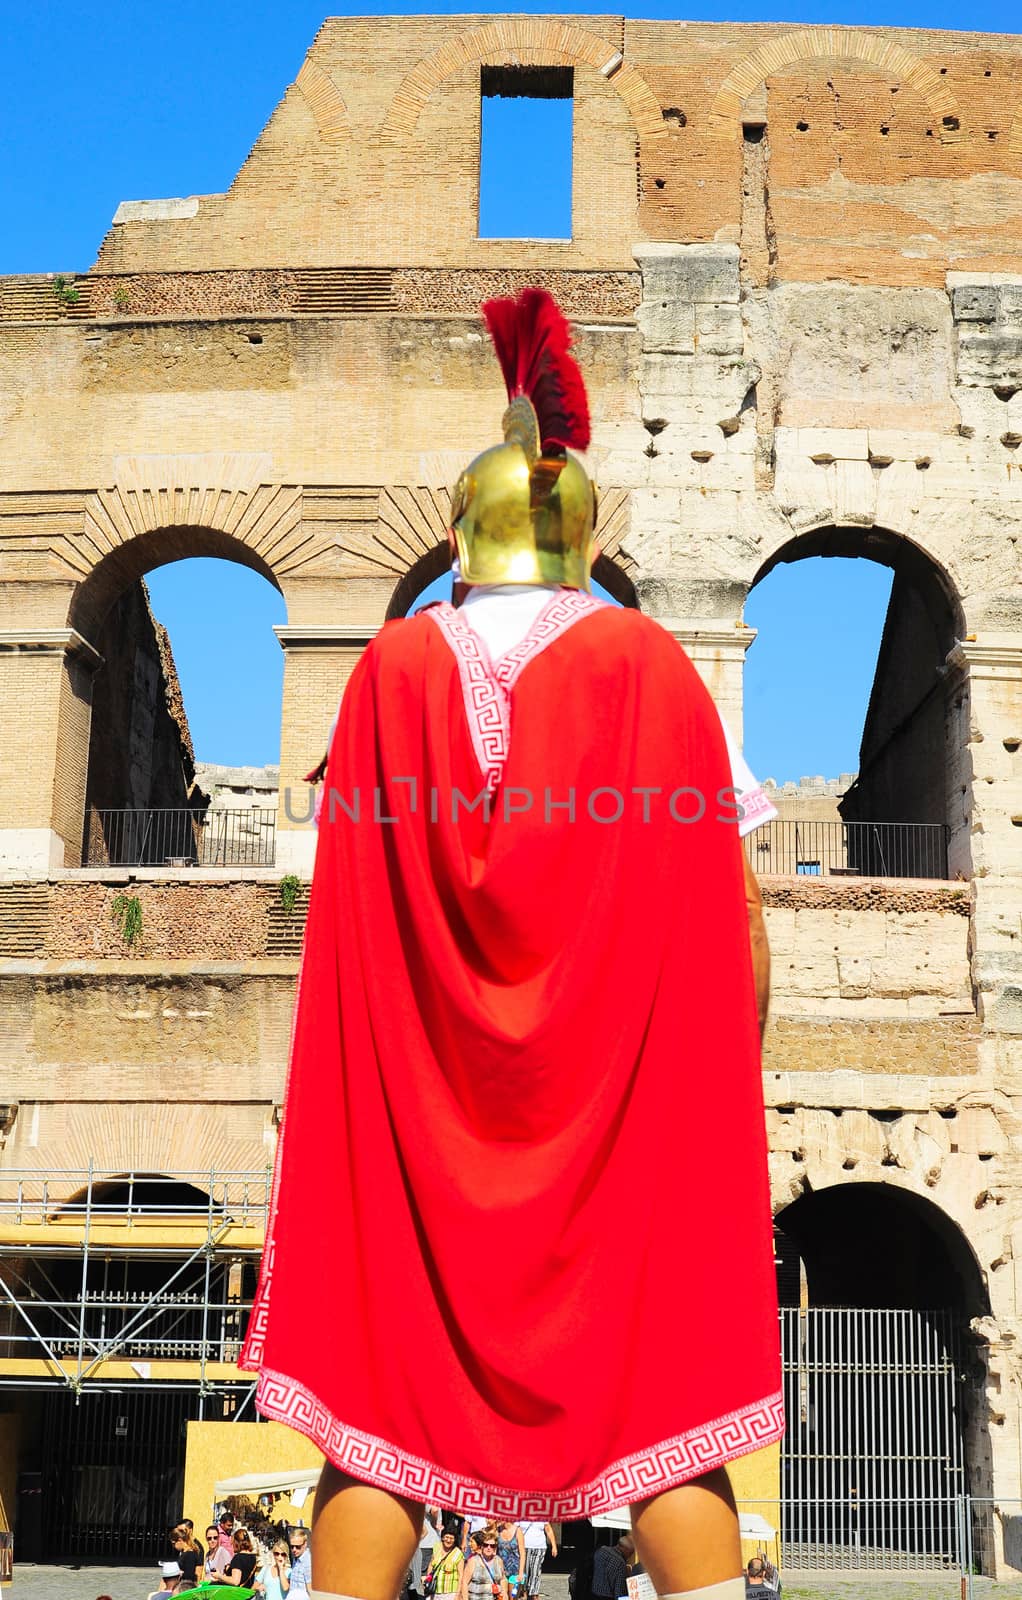 Rome, Italy - September 27, 2013: Roman legionary in ancient armour in front of the Colosseum in Rome, Italy. It has been estimated that over 500,000 people and over a million animals were killed there. 